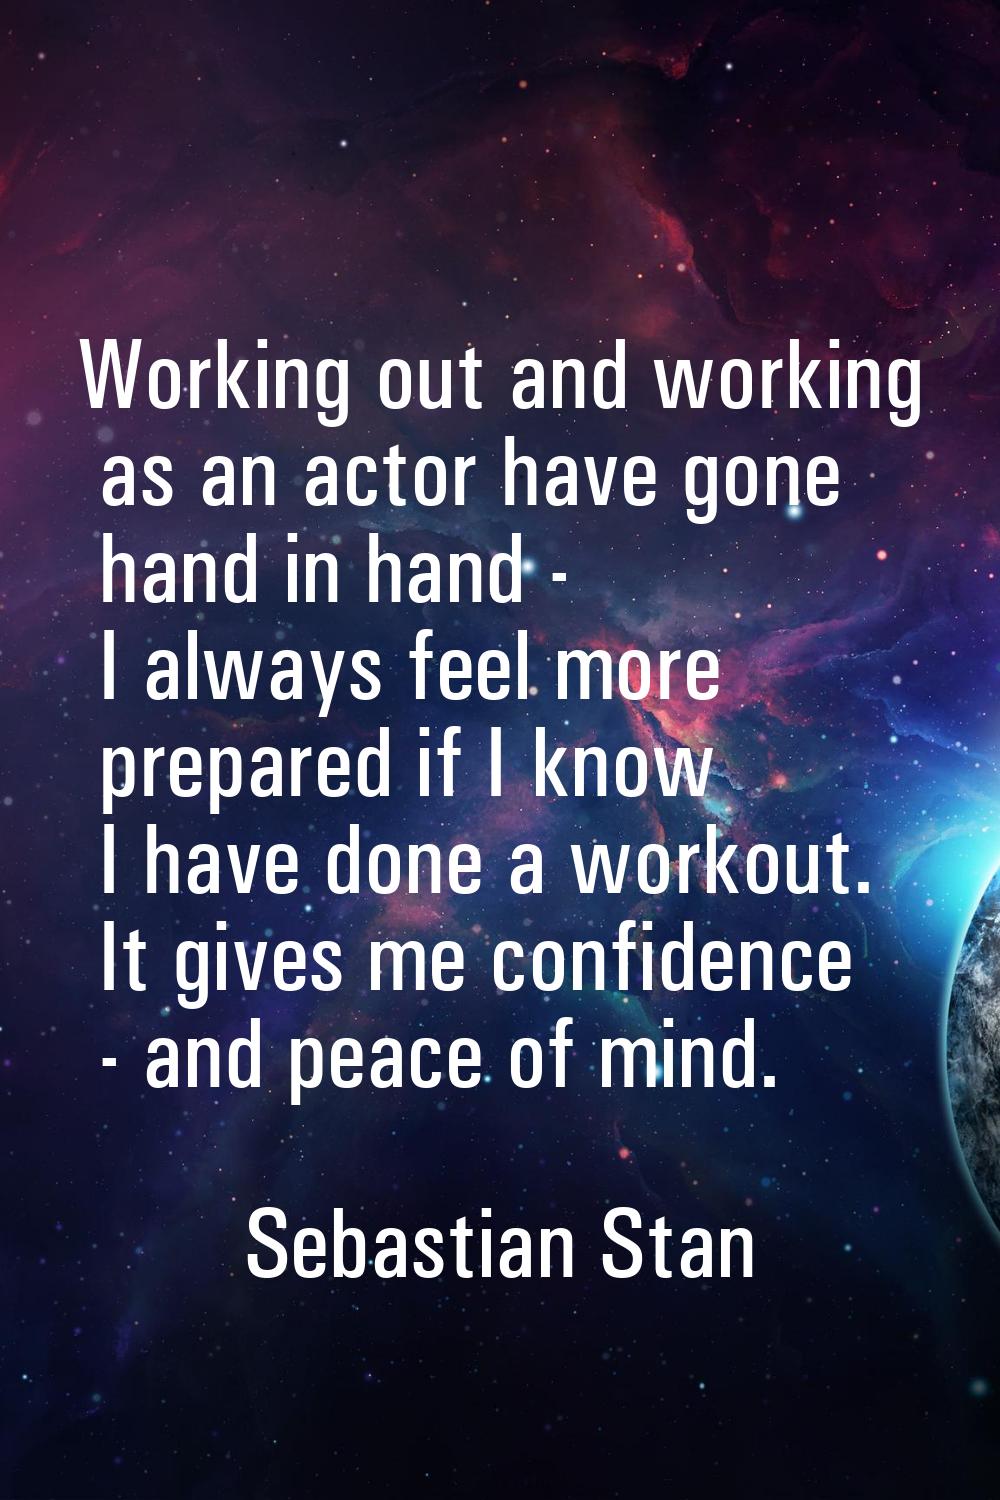 Working out and working as an actor have gone hand in hand - I always feel more prepared if I know 